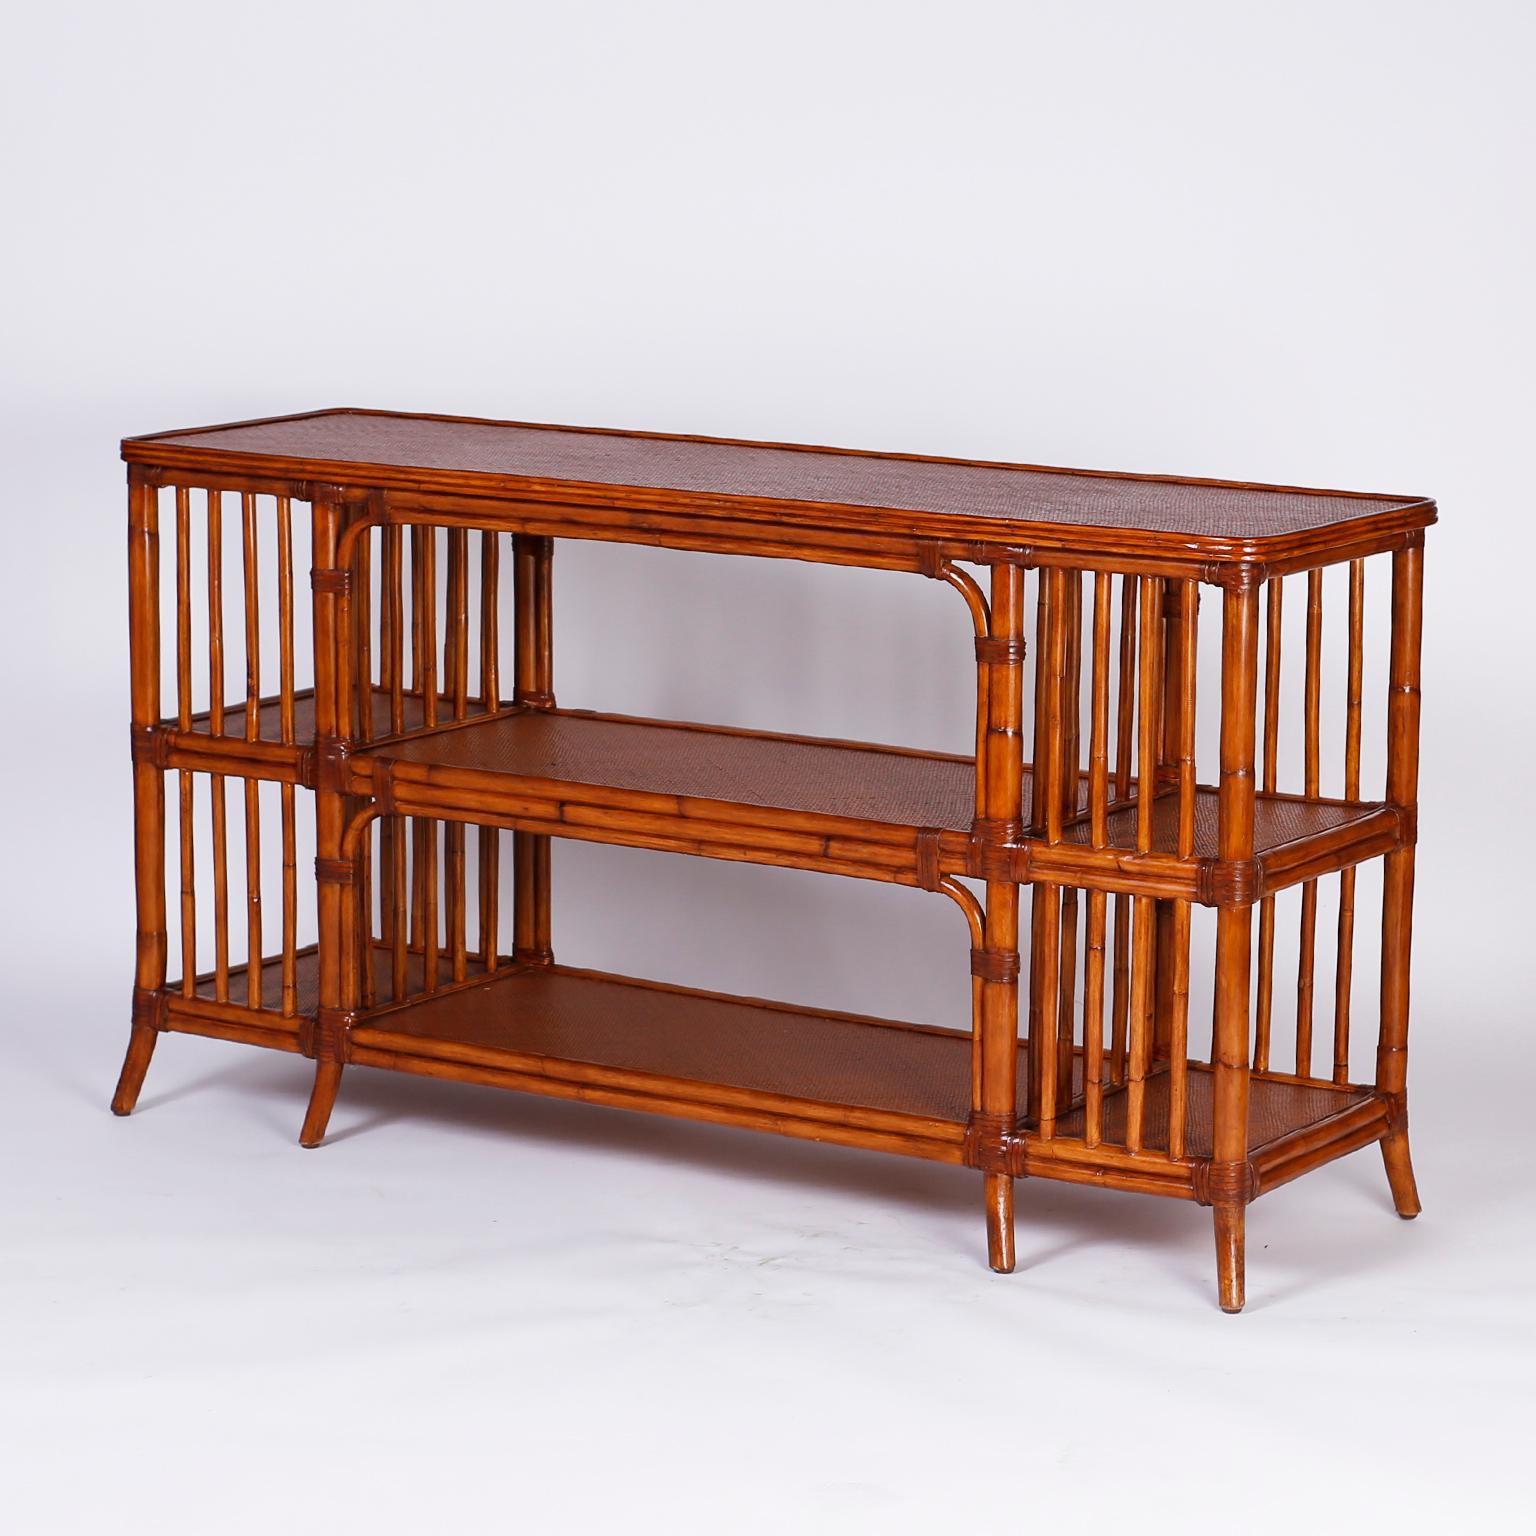 Midcentury three tiered console or server finished all around with a casual elegance featuring a bamboo frame wrapped with wicker reed at the joints, grass cloth surfaces on all three tiers, and stylish splayed legs.